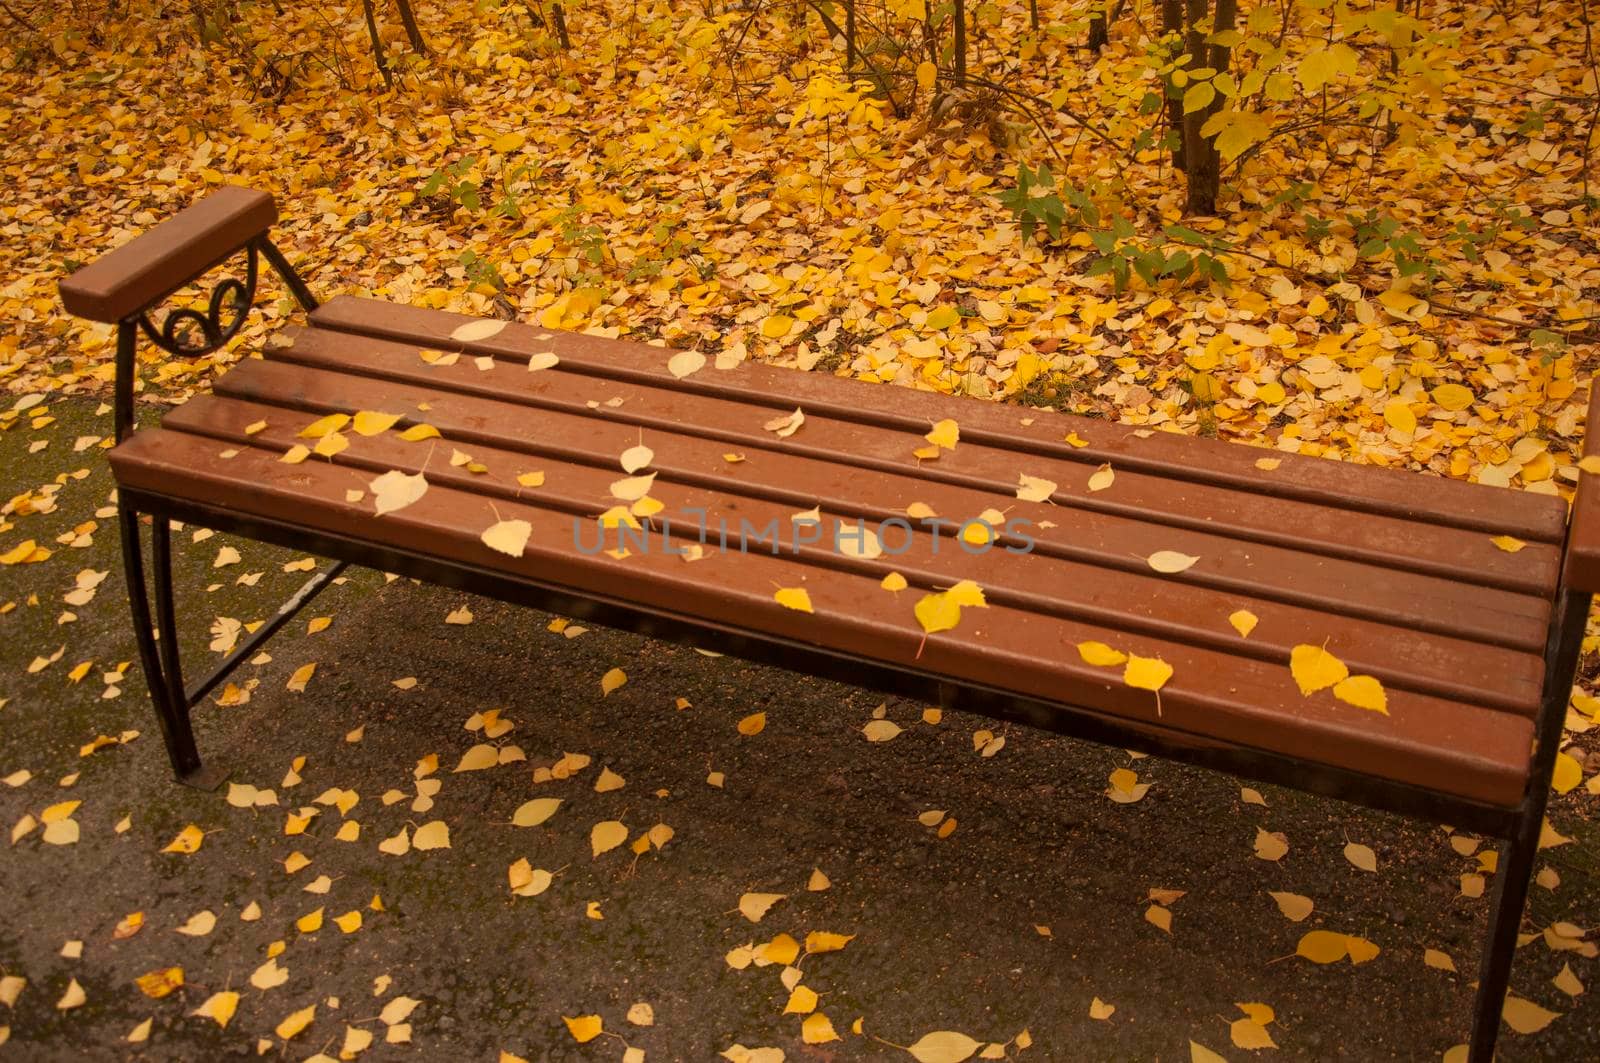 Autumn landscape, autumn in the city park. City park bench in the fall park, yellow fallen leaves on the road, autumn trees and golden autumn leaves, park landscape